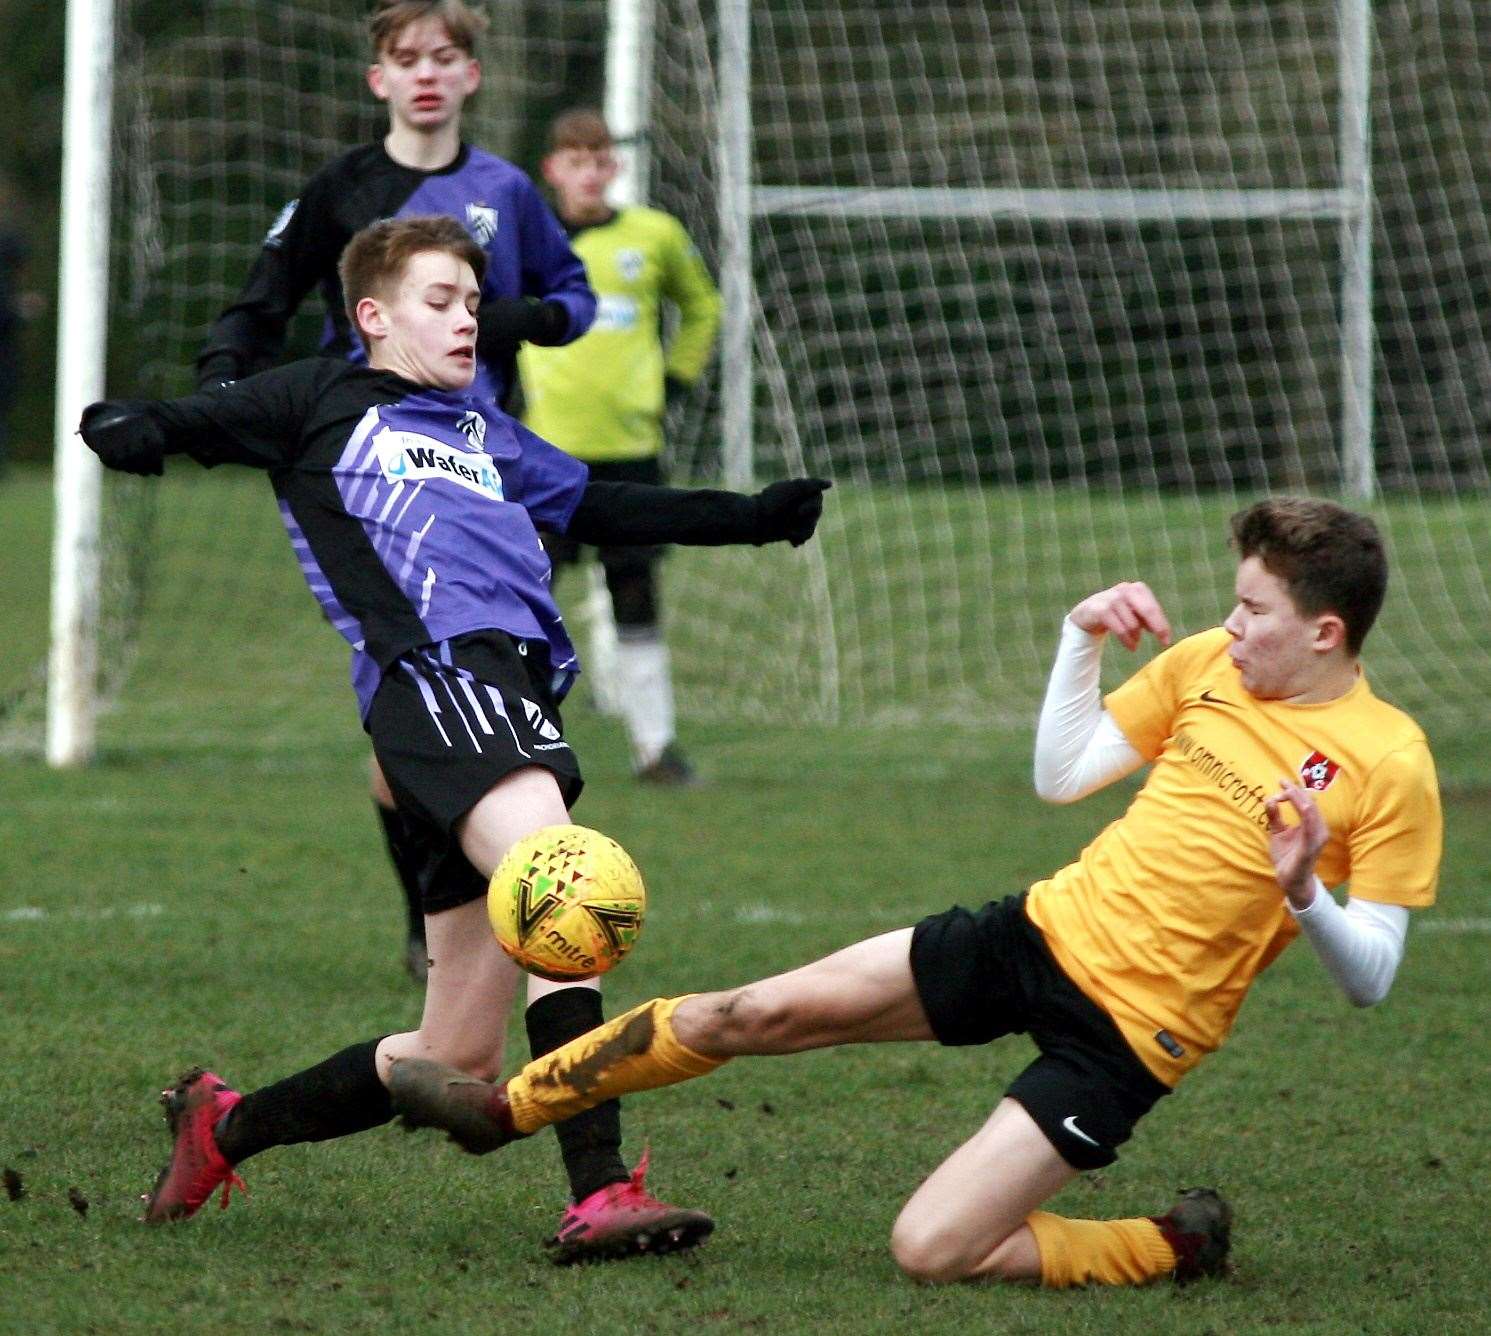 Thamesview (yellow) slide in against Anchorians Pumas in Under-15 Division 2 Picture: Phil Lee